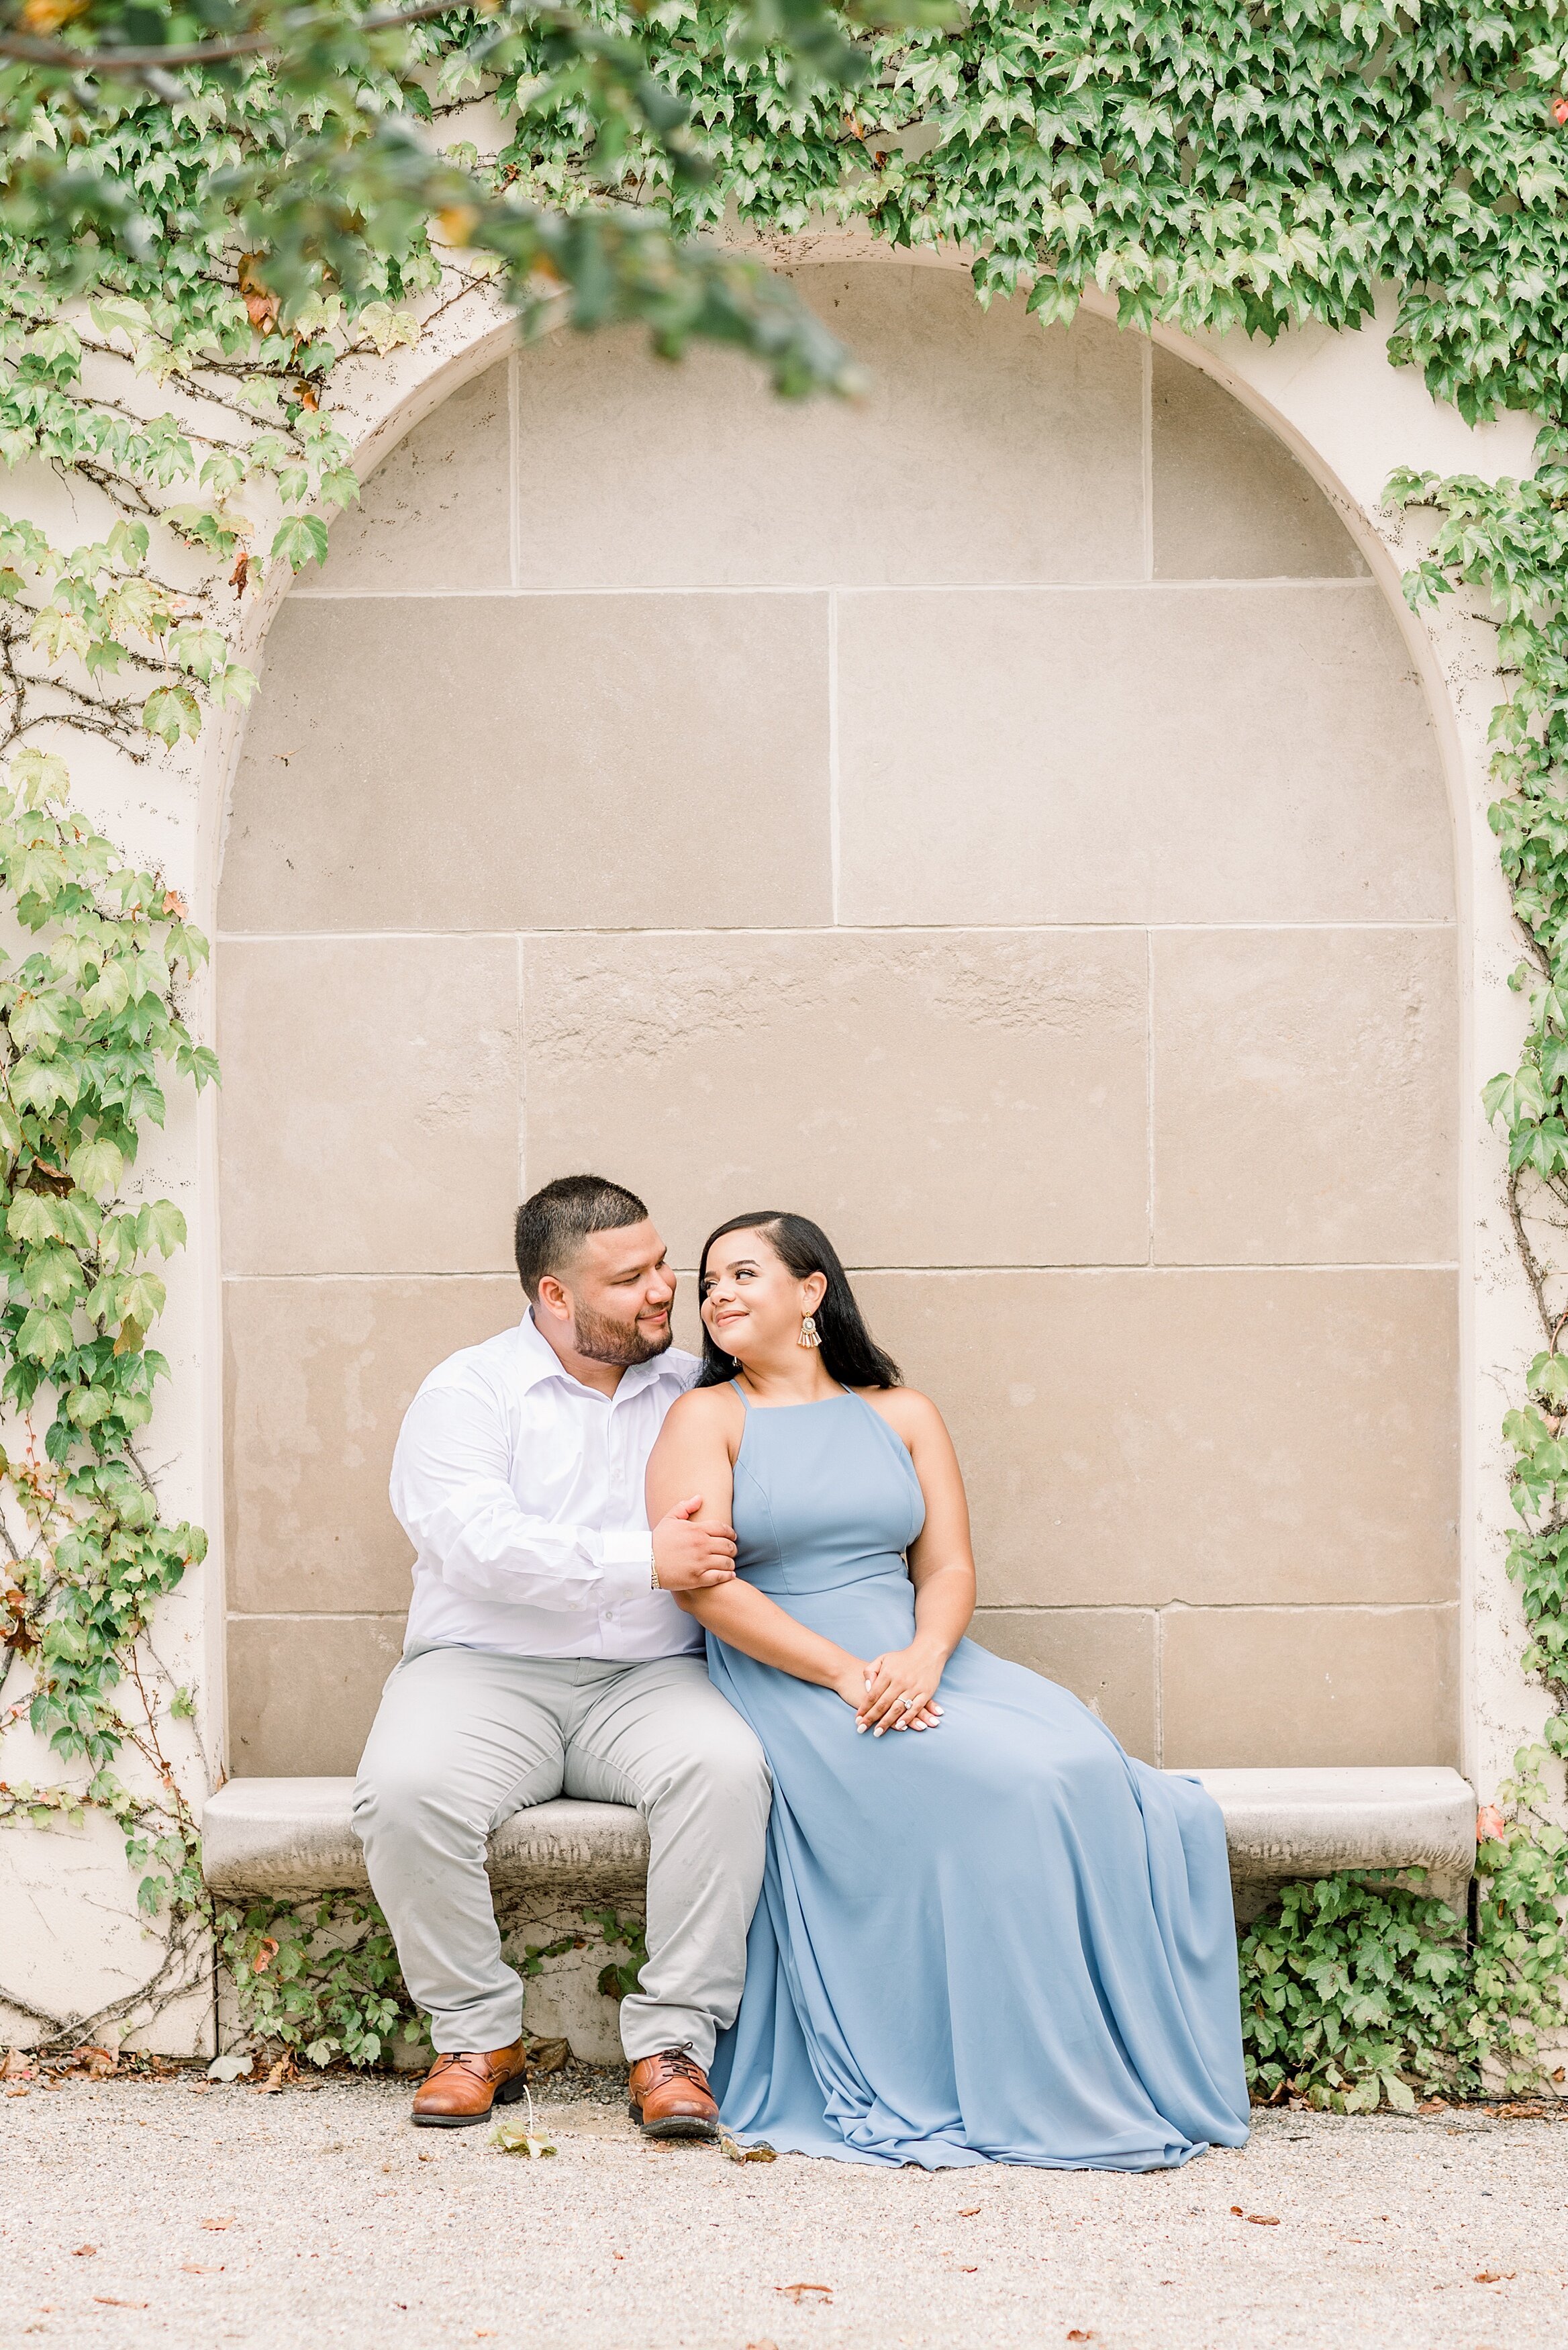 Longwood Gardens Kennet Square Pa Summer Engagement Session Photography_7666.jpg